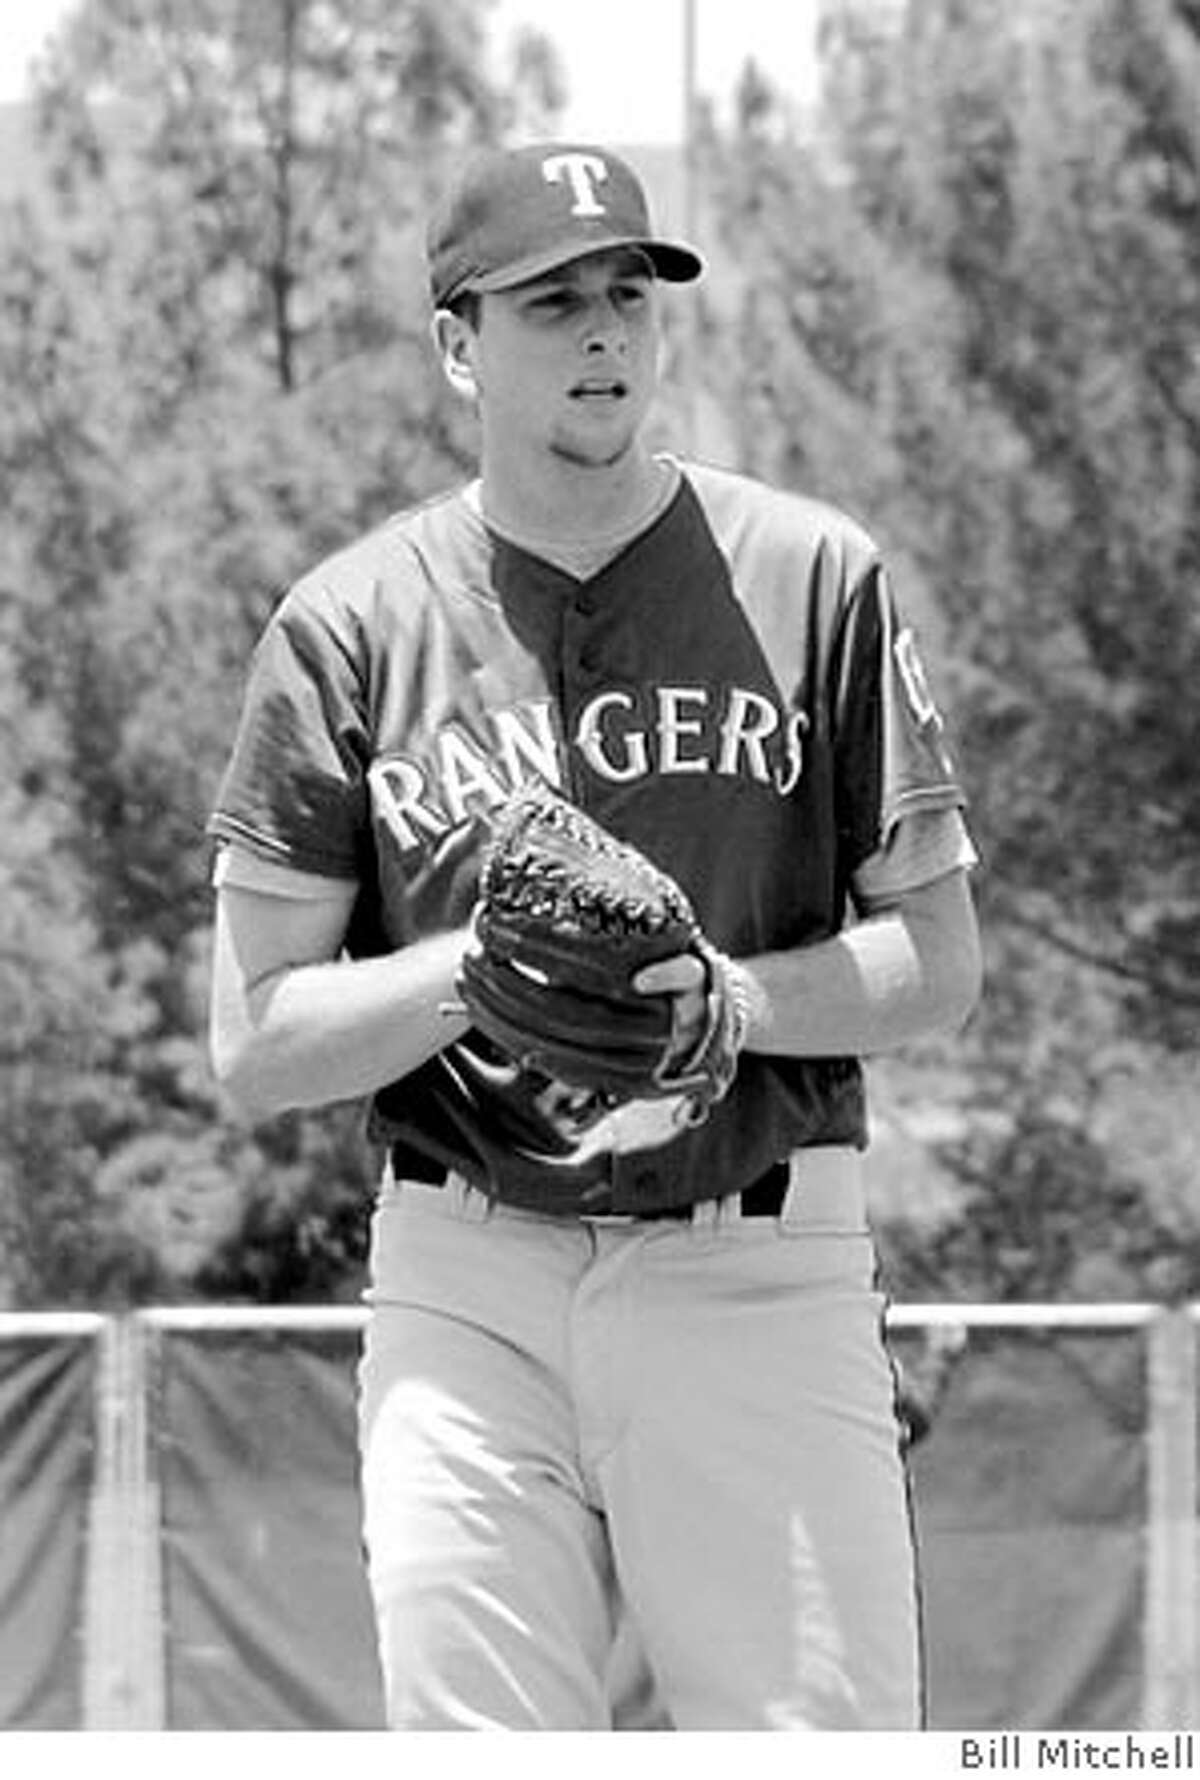 Scott Feldman of Burlingame, a former College of San Mateo standout, pitches for the Texas Rangers' AA team. Photo by Bill Mitchell